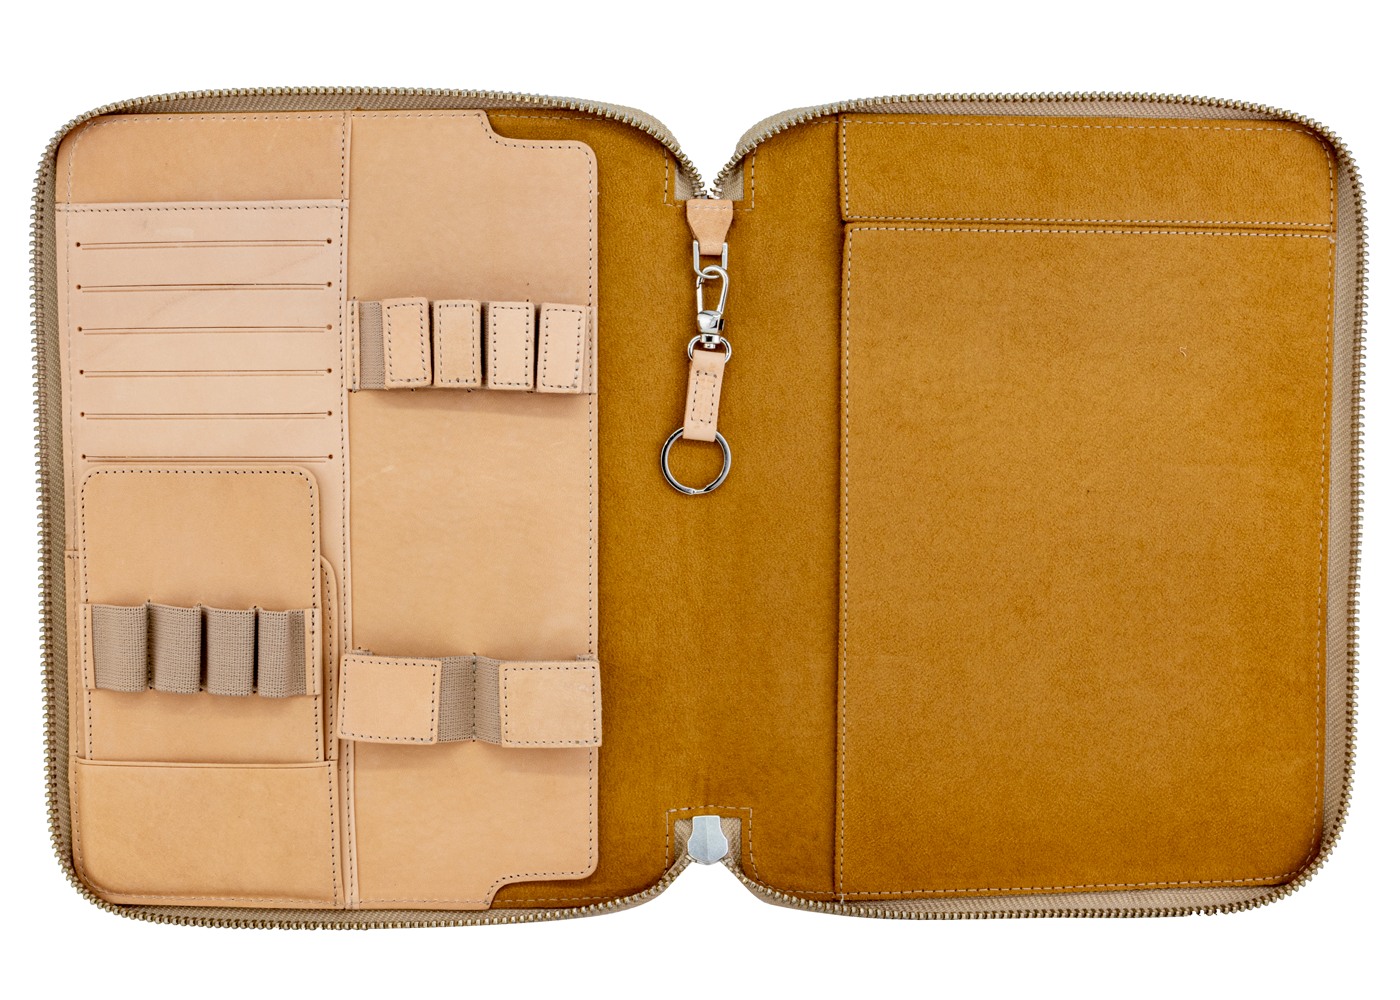 Galen Leather Co. Zippered B5 Notebook Folio- Undyed Leather